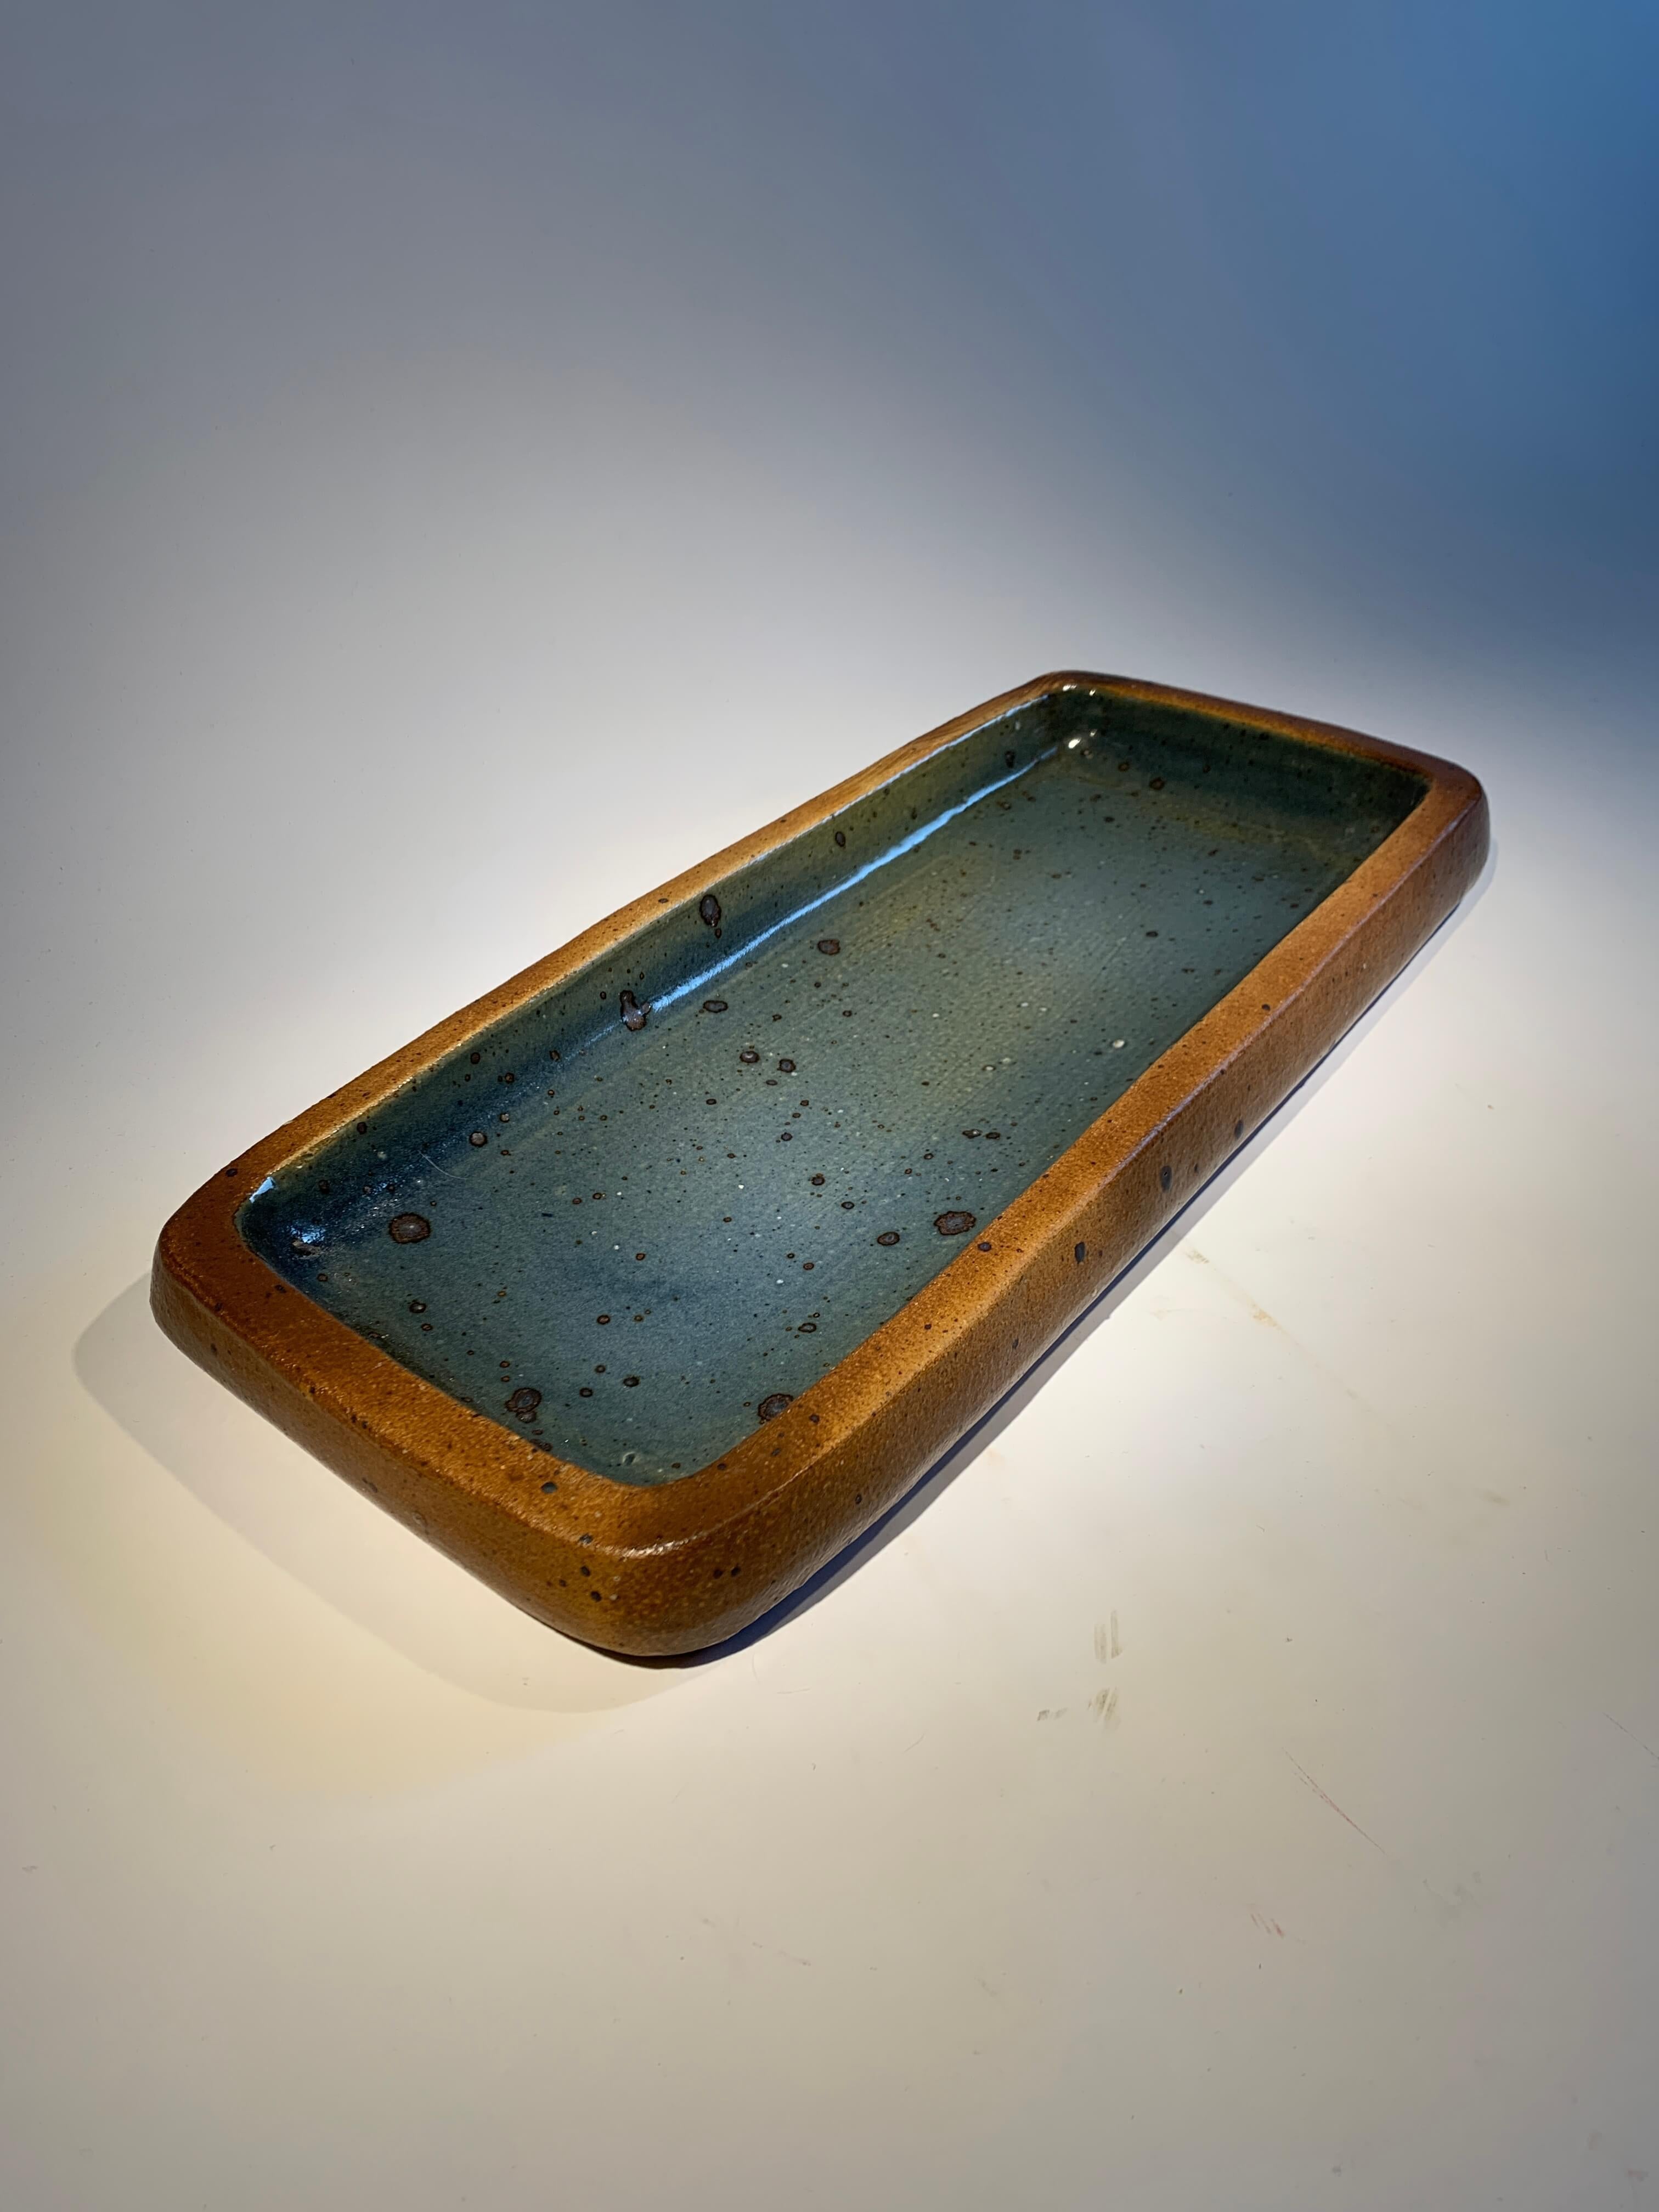 Pierre Digan (1941-2016), artist from La Borne in France, was renowned for his sandstone creations. 
Its generous pyrite stoneware bowl, glazed with a magnificent blue inside, is a fine example.
Unique piece in perfect condition.

Dimensions:
L52cm